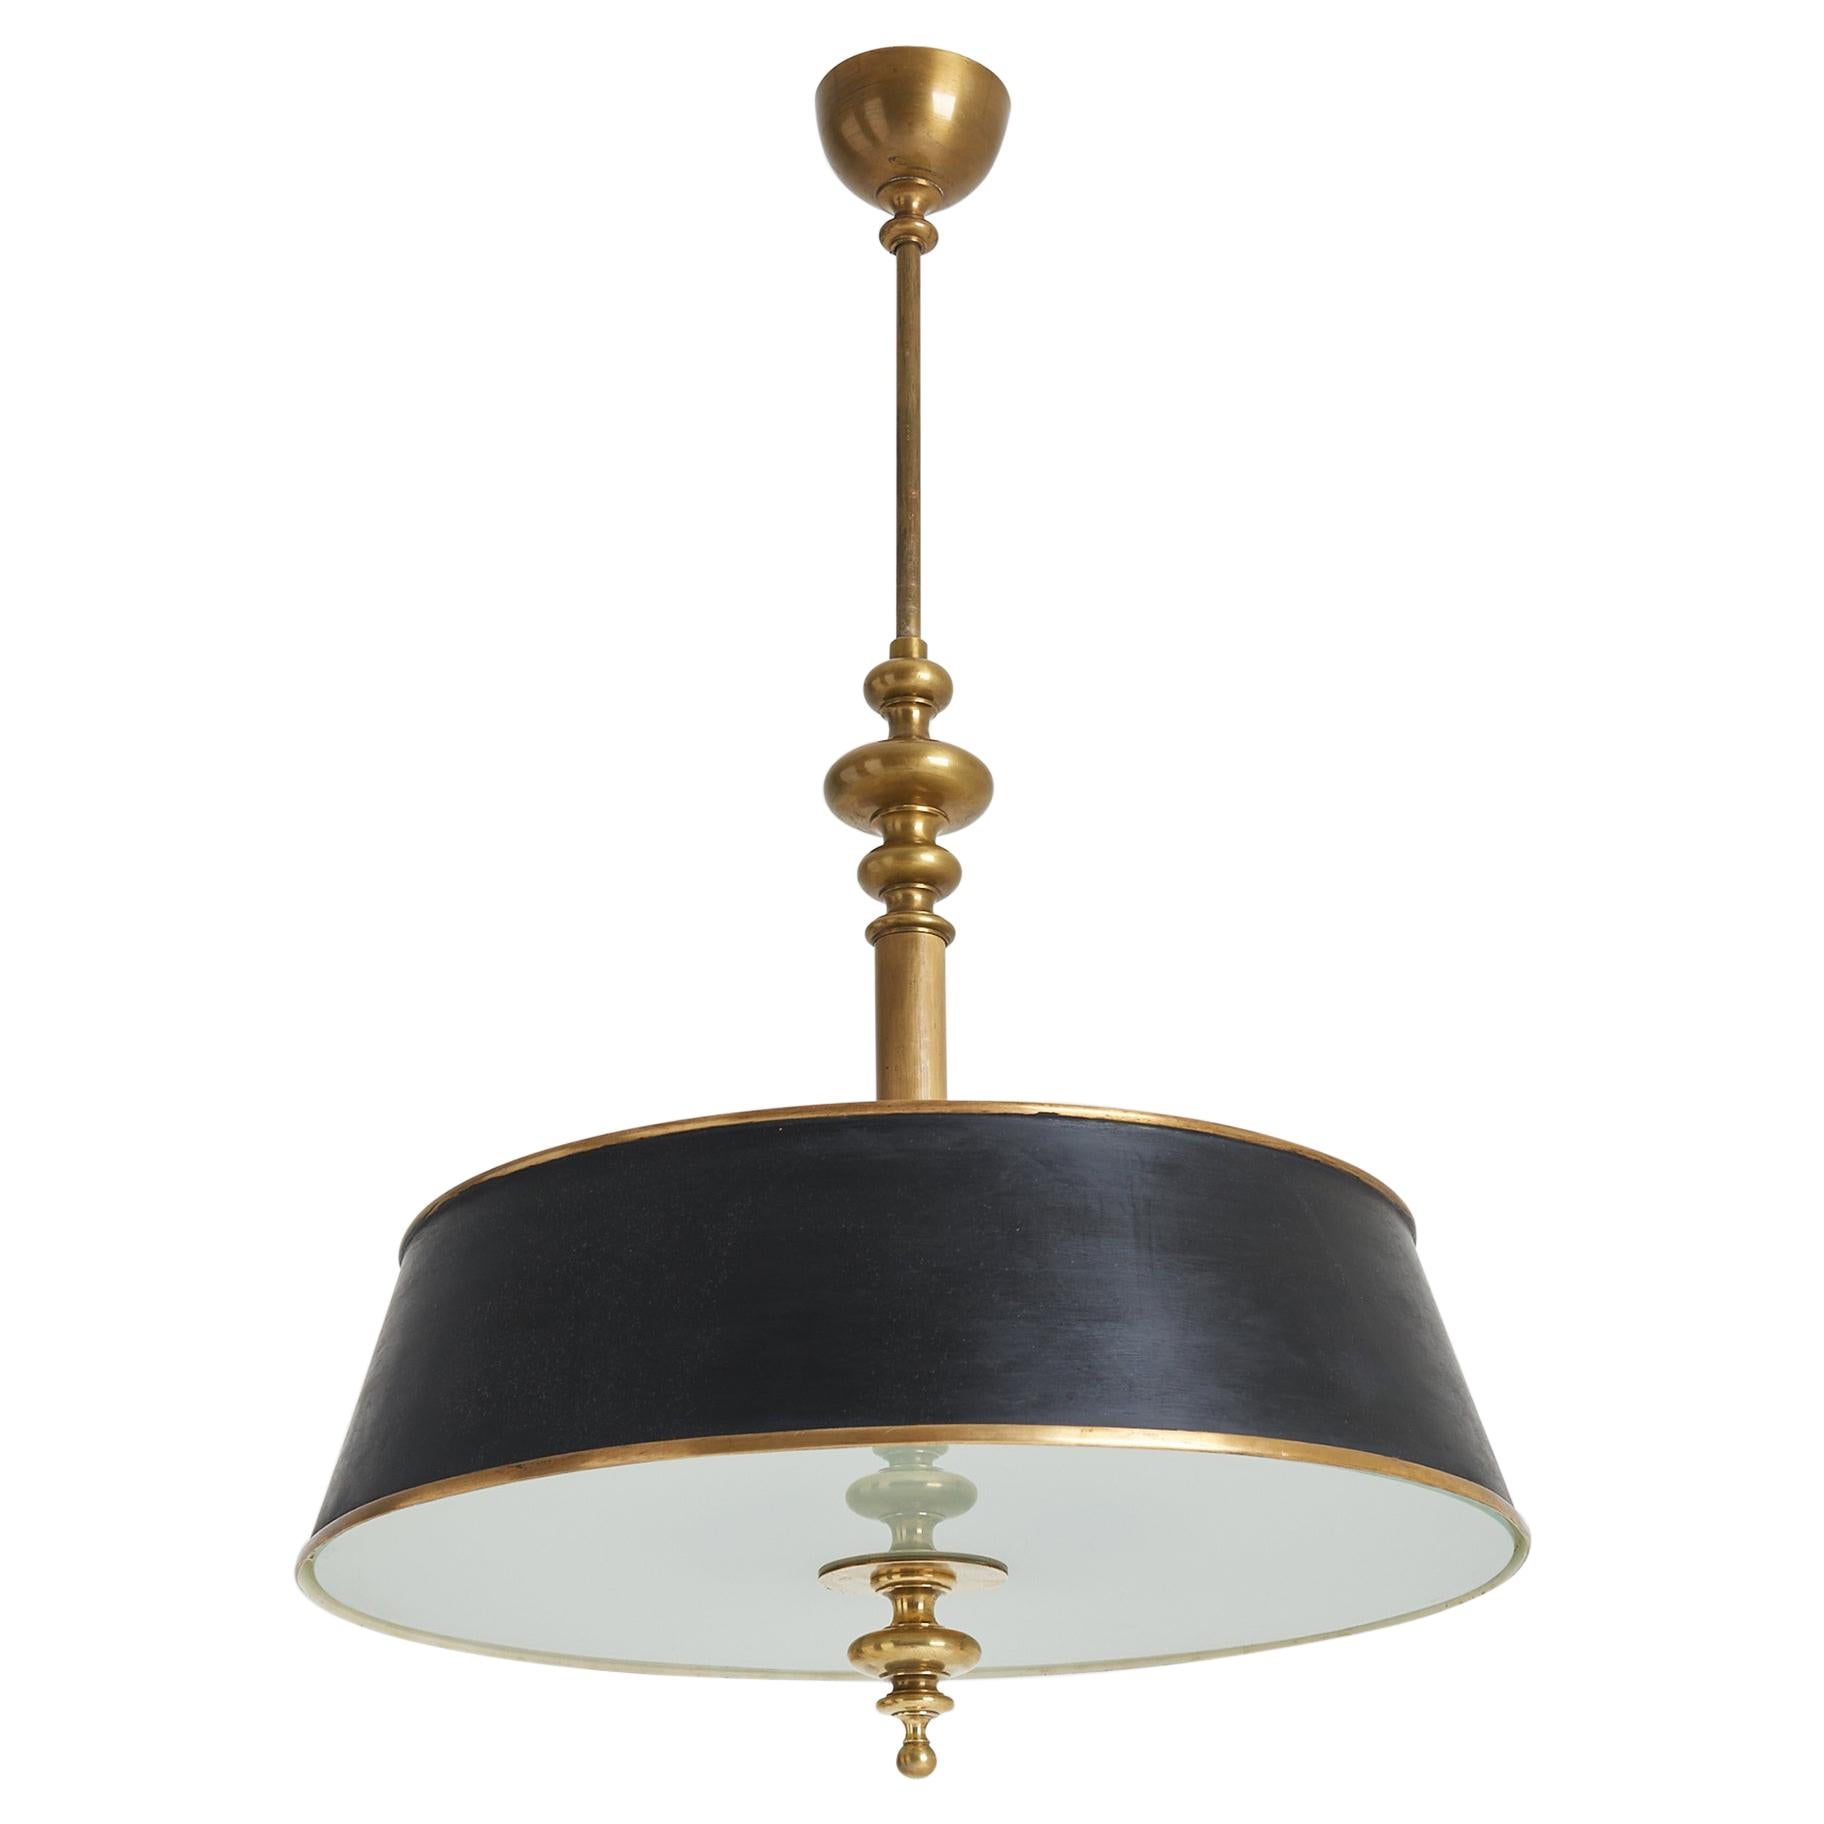 1940s Brass and Glass Ceiling Light